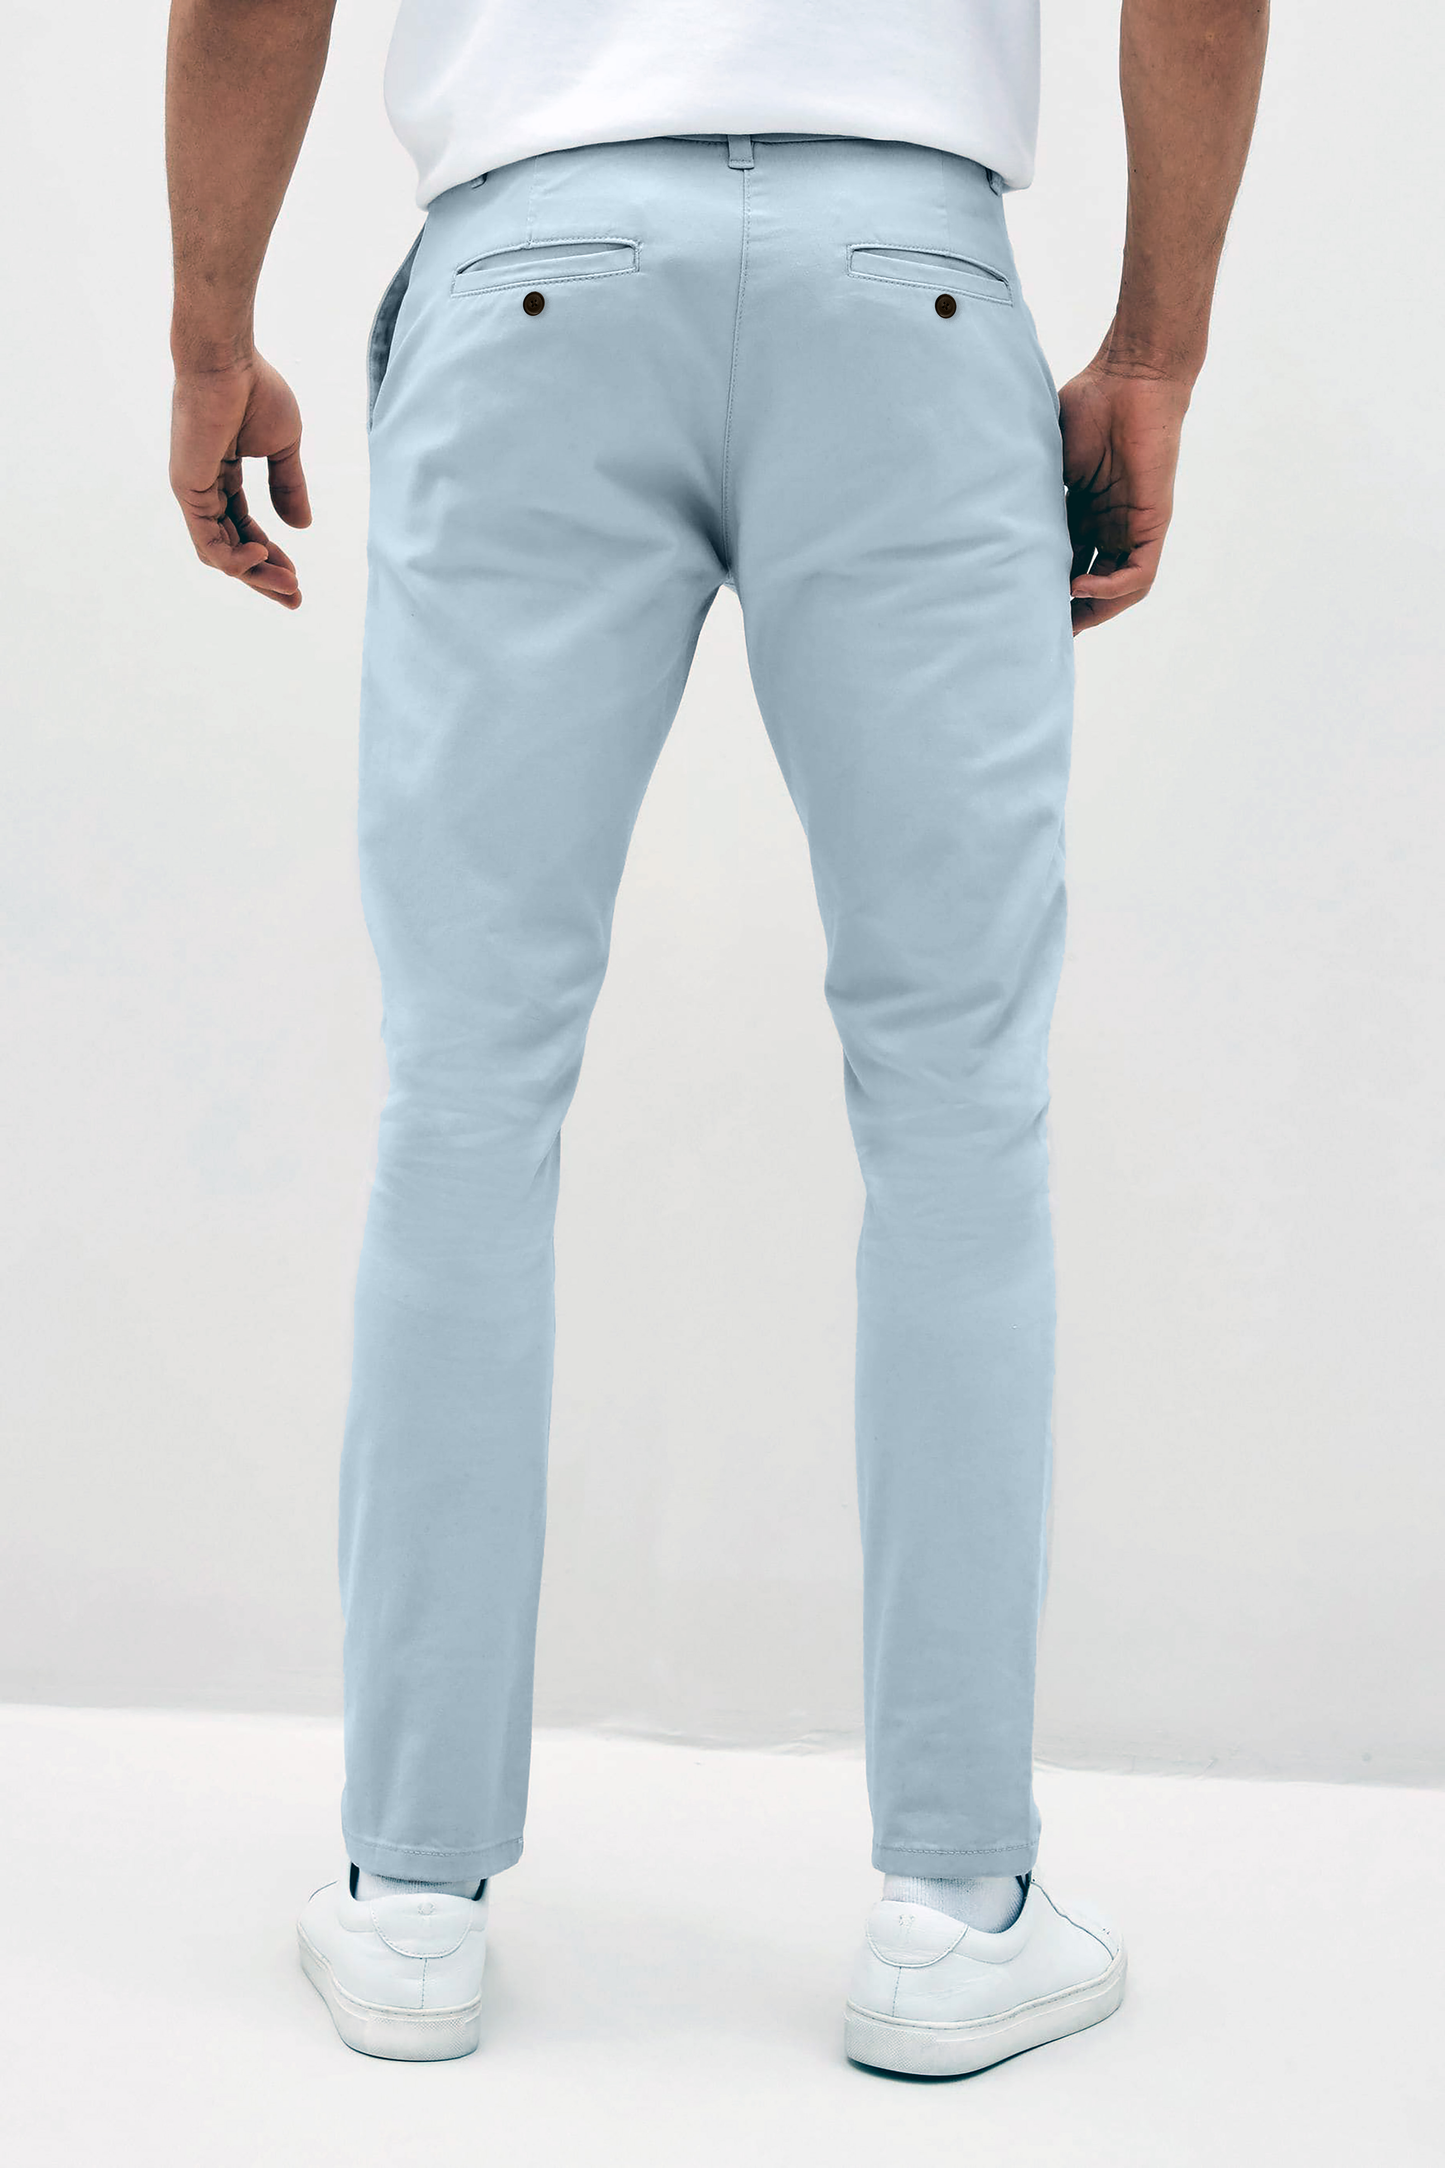 Mens sky Blue chinos with front slanted pockets, jetted back pockets. zip fly fastening and brown horne buttons on the waistband and back pockets, the fit is a slim fit, this is worn with a white tee and white unbranded trainers